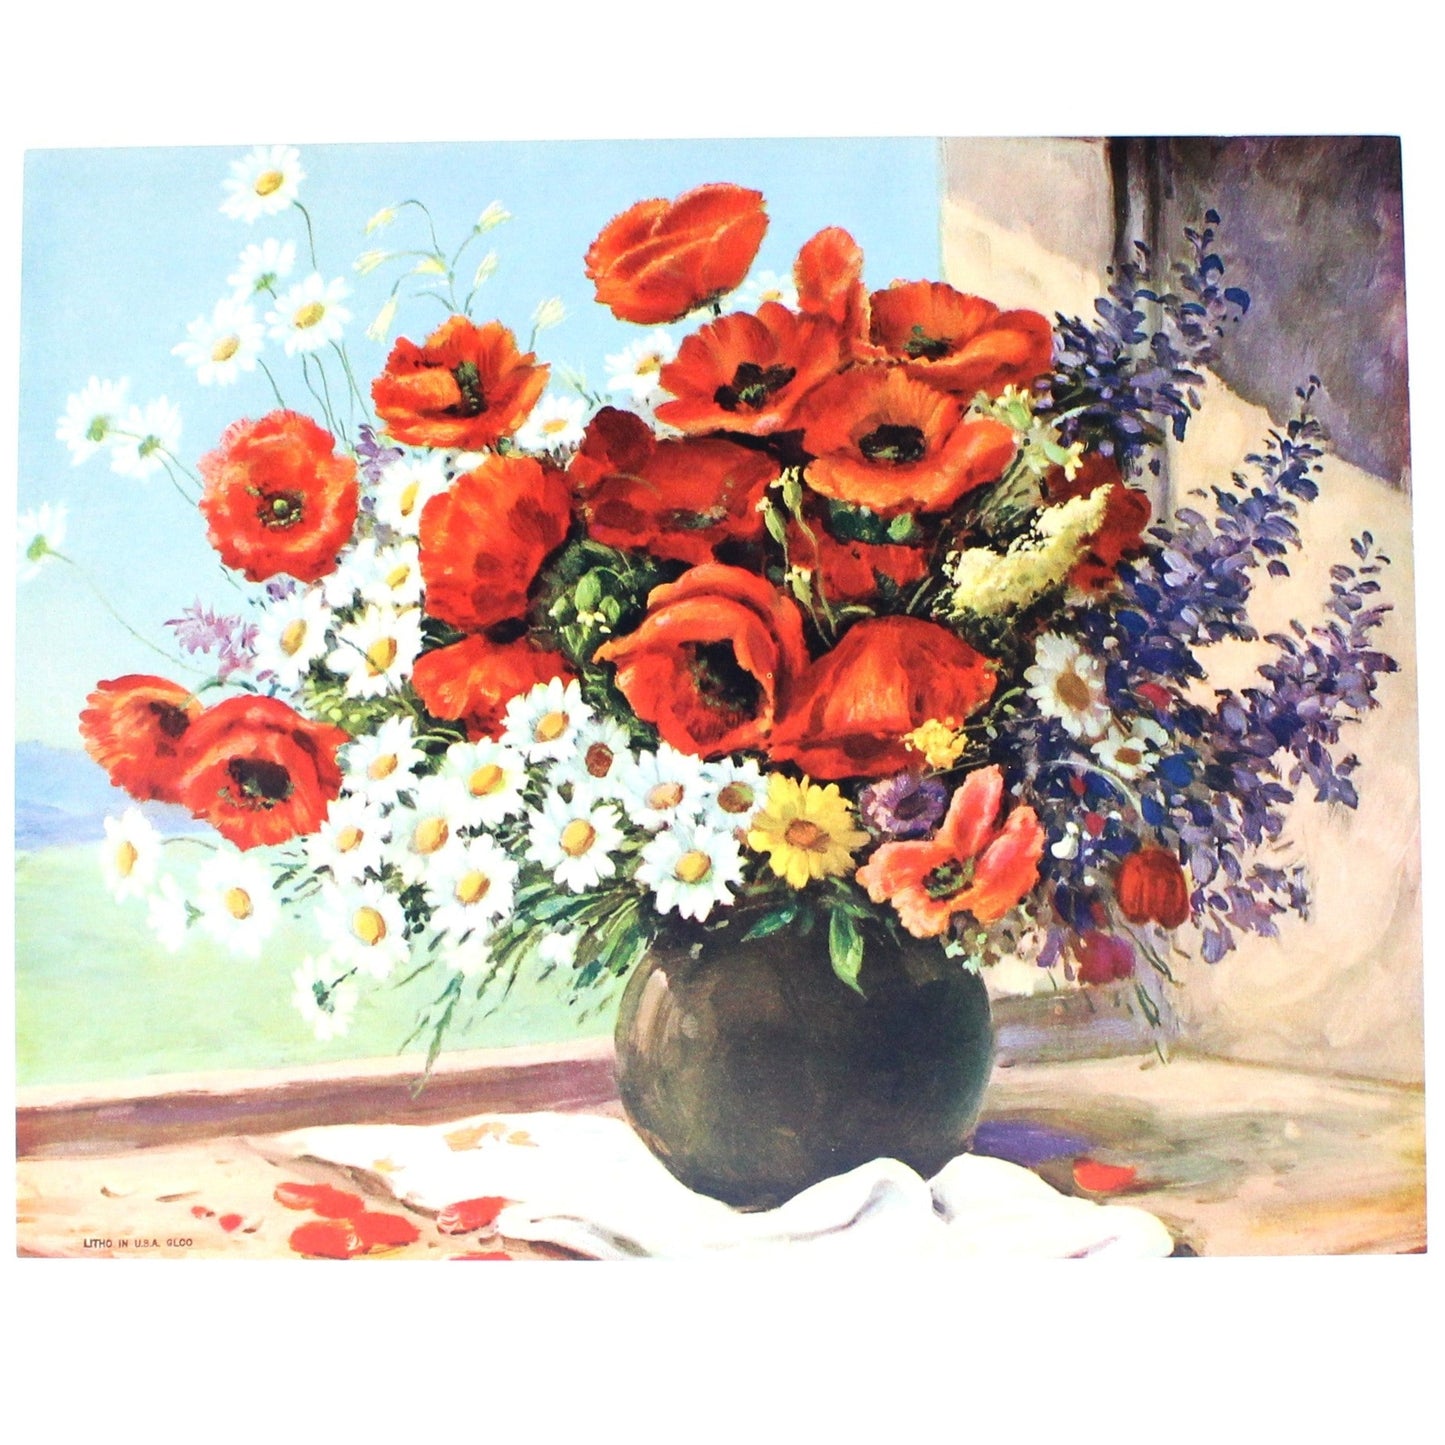 Print, Lithograph, Floral Artwork with Red Poppies & Daisies in Vase, Vintage